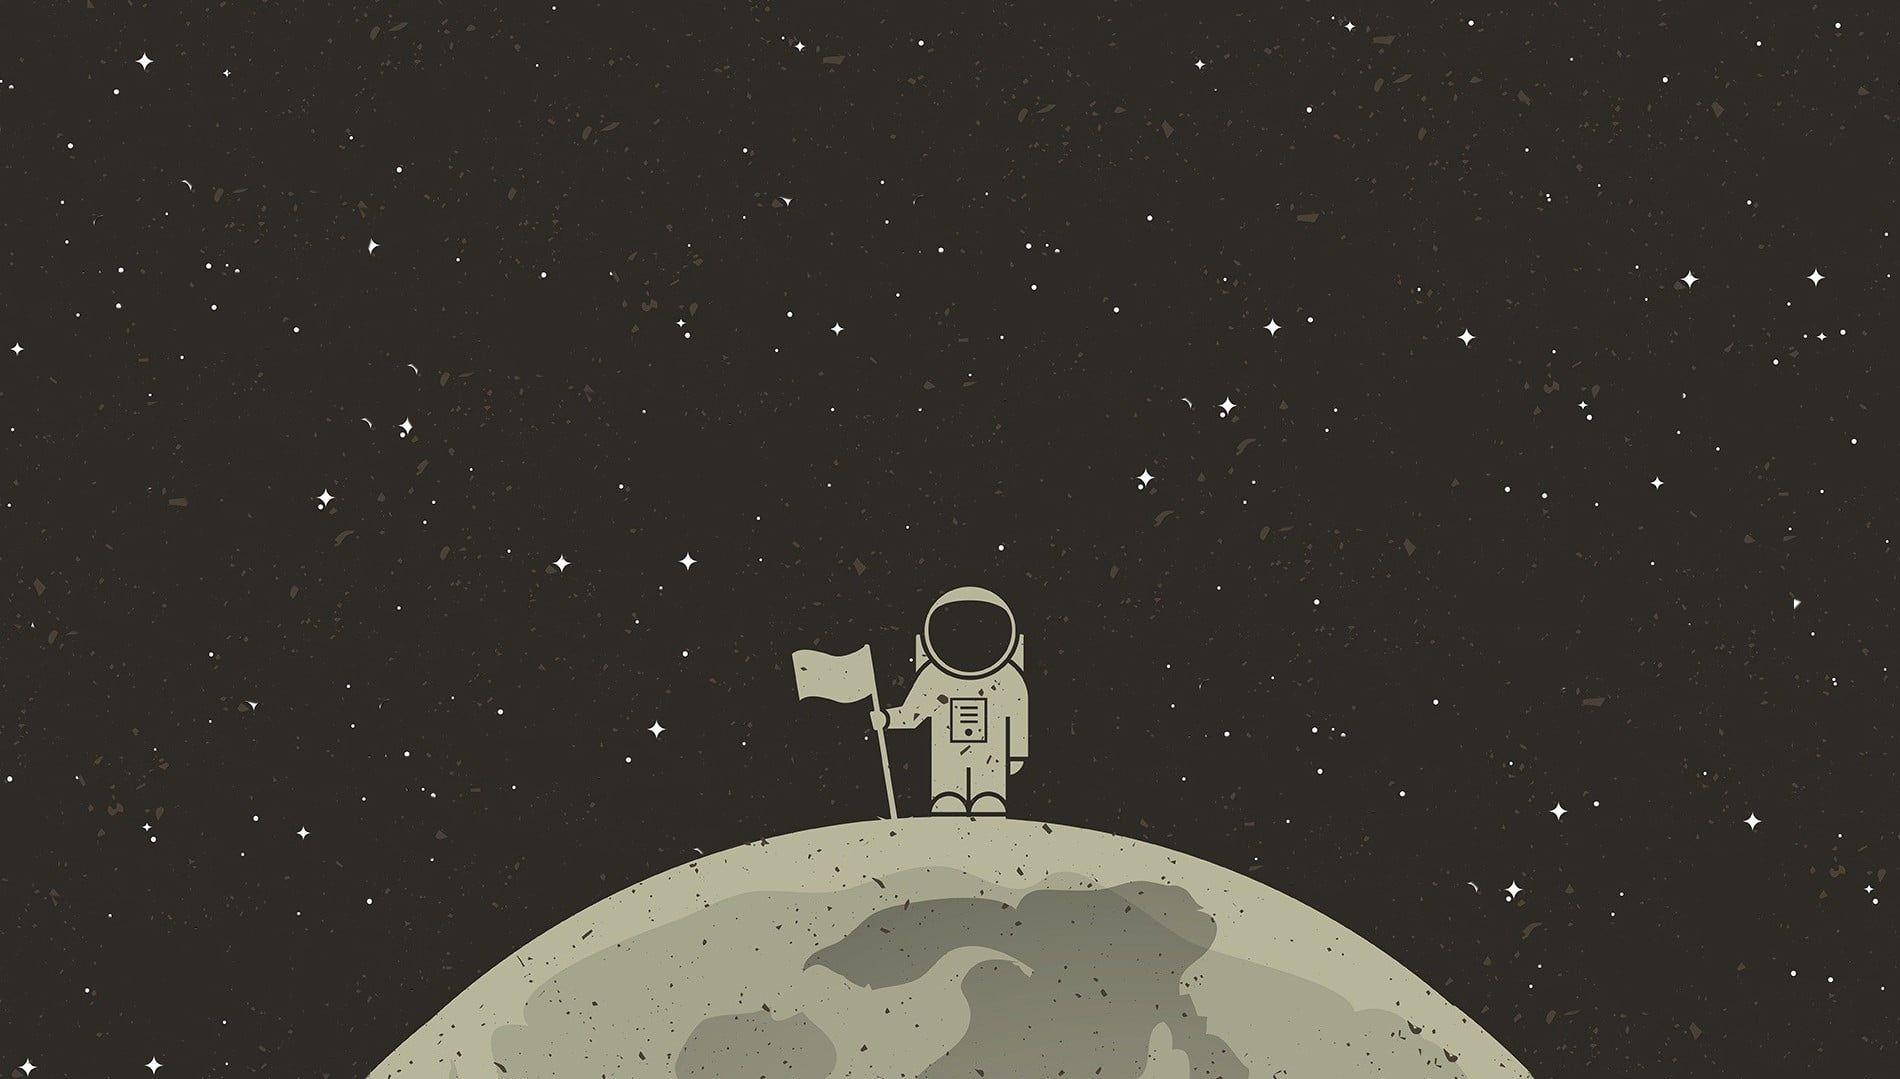 HD Wallpaper White Astronaut Holding Flag On Outer Space Simple